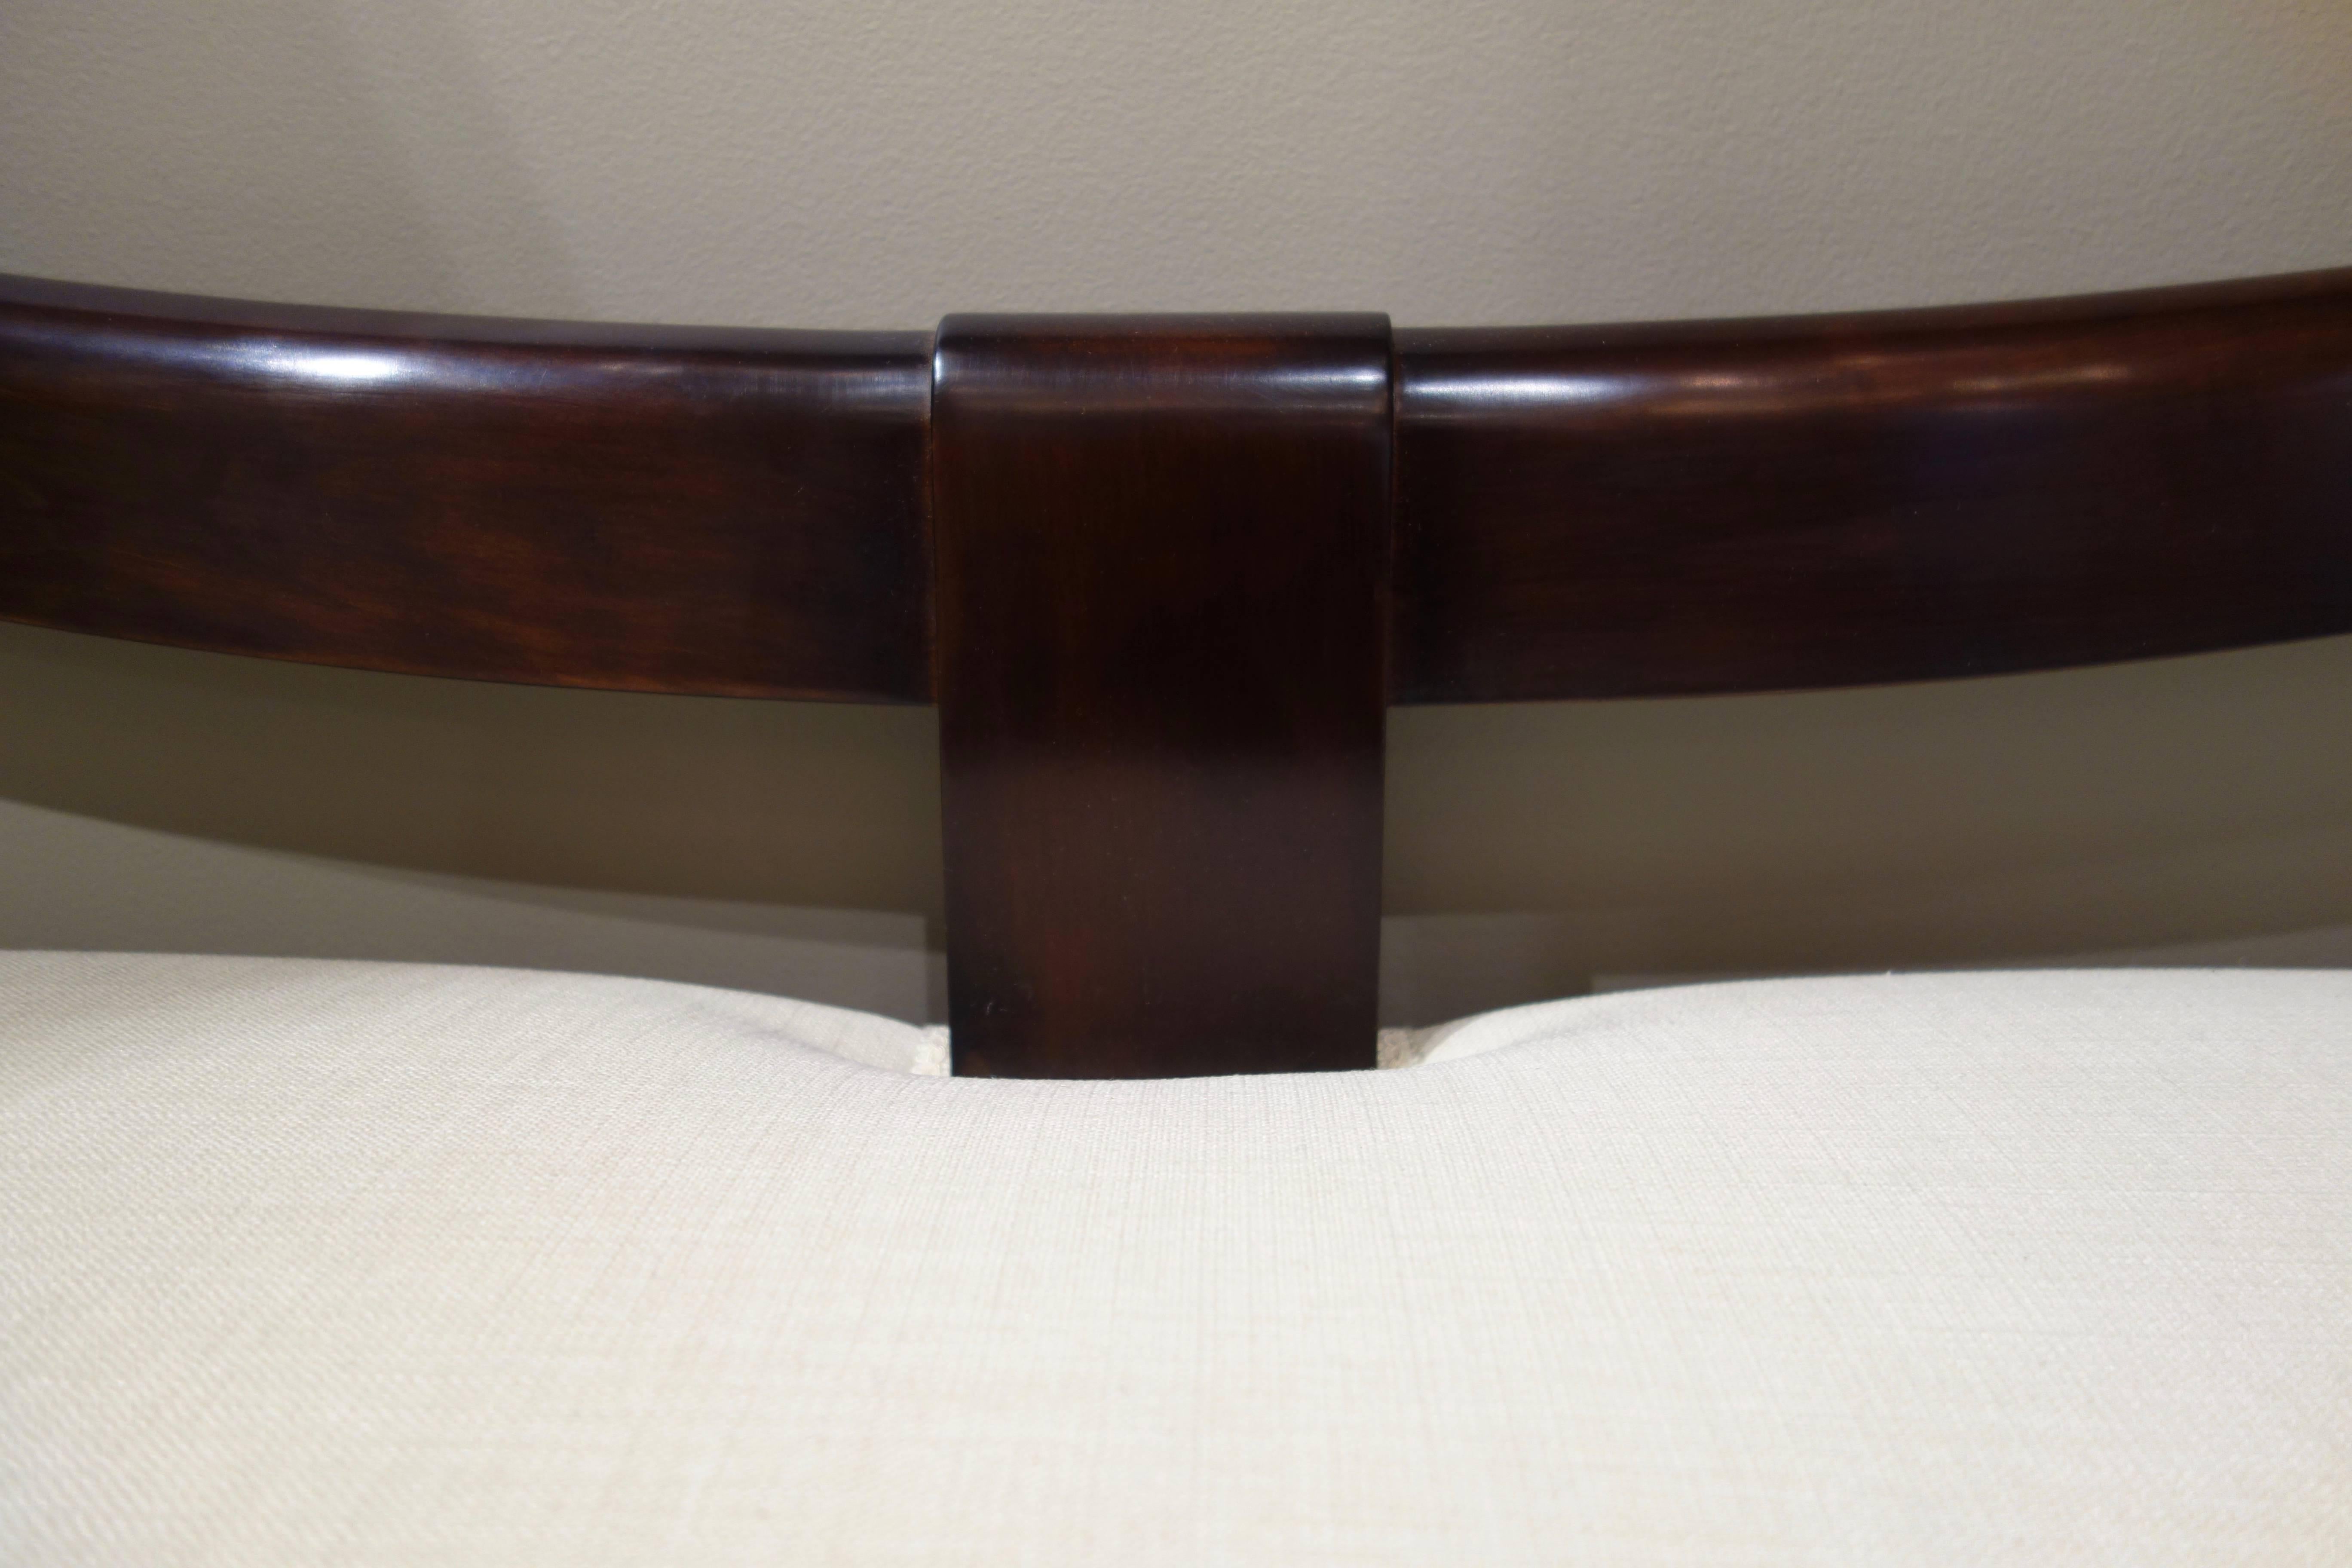 An Italian long bench or settee re-editioned originally designed by Emilio Lancia, the Italian architect and designer who was in partnership with Gio Ponti from 1923-1933. The bench of dark brown mahogany features a curved back with centre